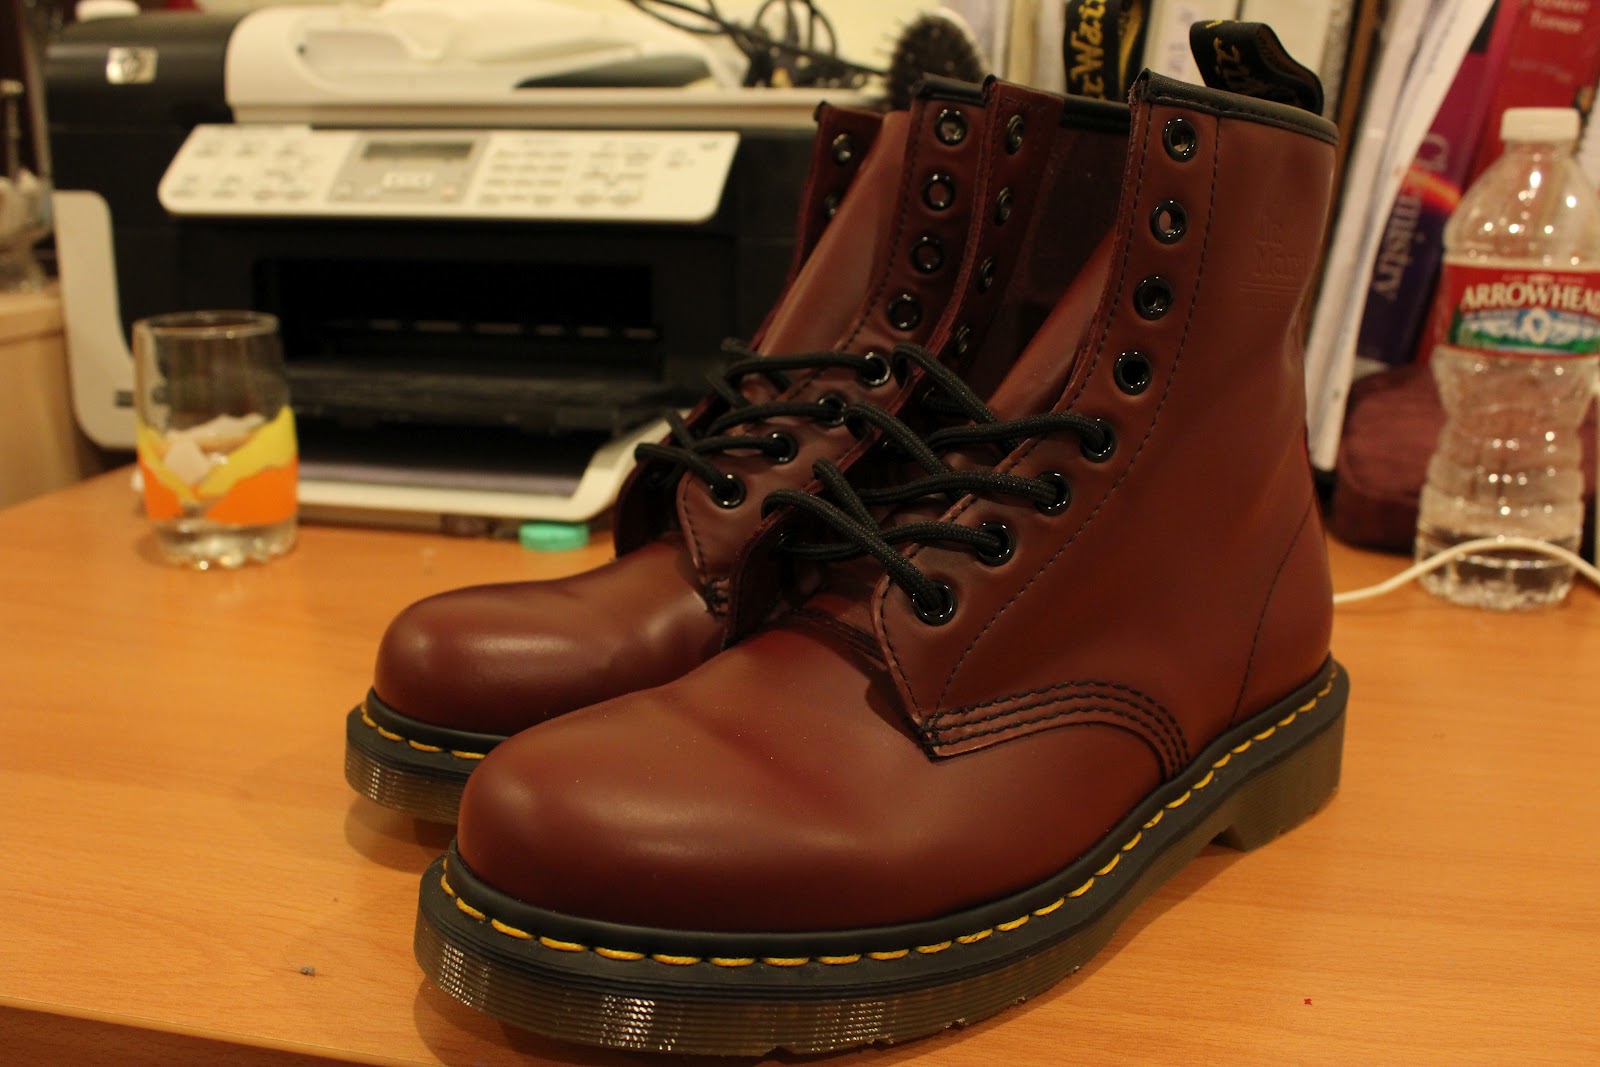 Cloudia: My 1460 Cherry Red Smooth Doc Martens